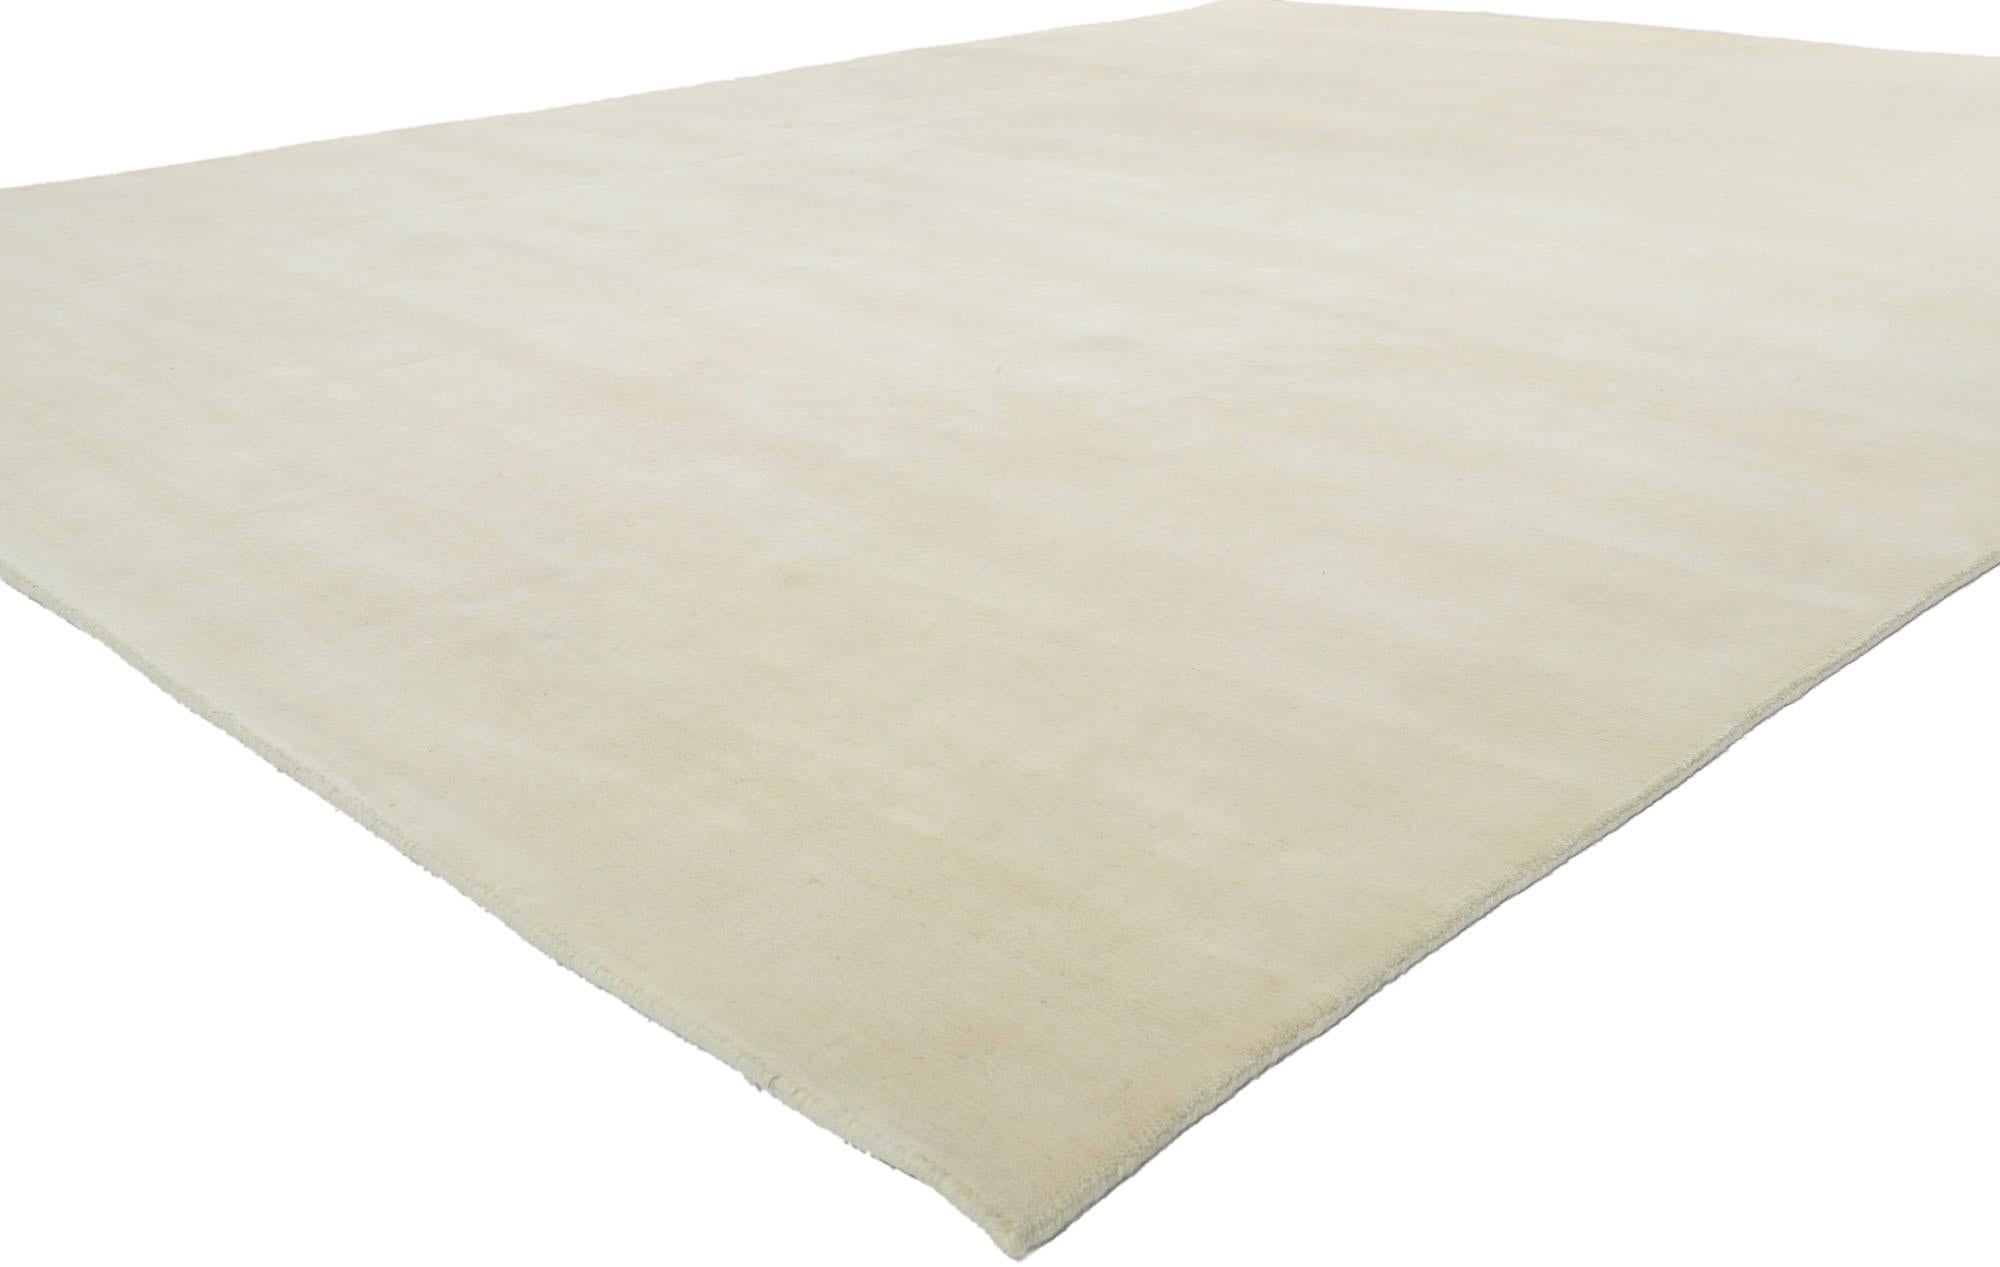 30753 New Contemporary Ivory Area Rug with Minimalist Style 09'02 x 11'11. Embodying contemporary elegance and minimalism, this hand-loomed wool rug from modern India seamlessly encapsulates a serene beauty rooted in the essence of Shibui design